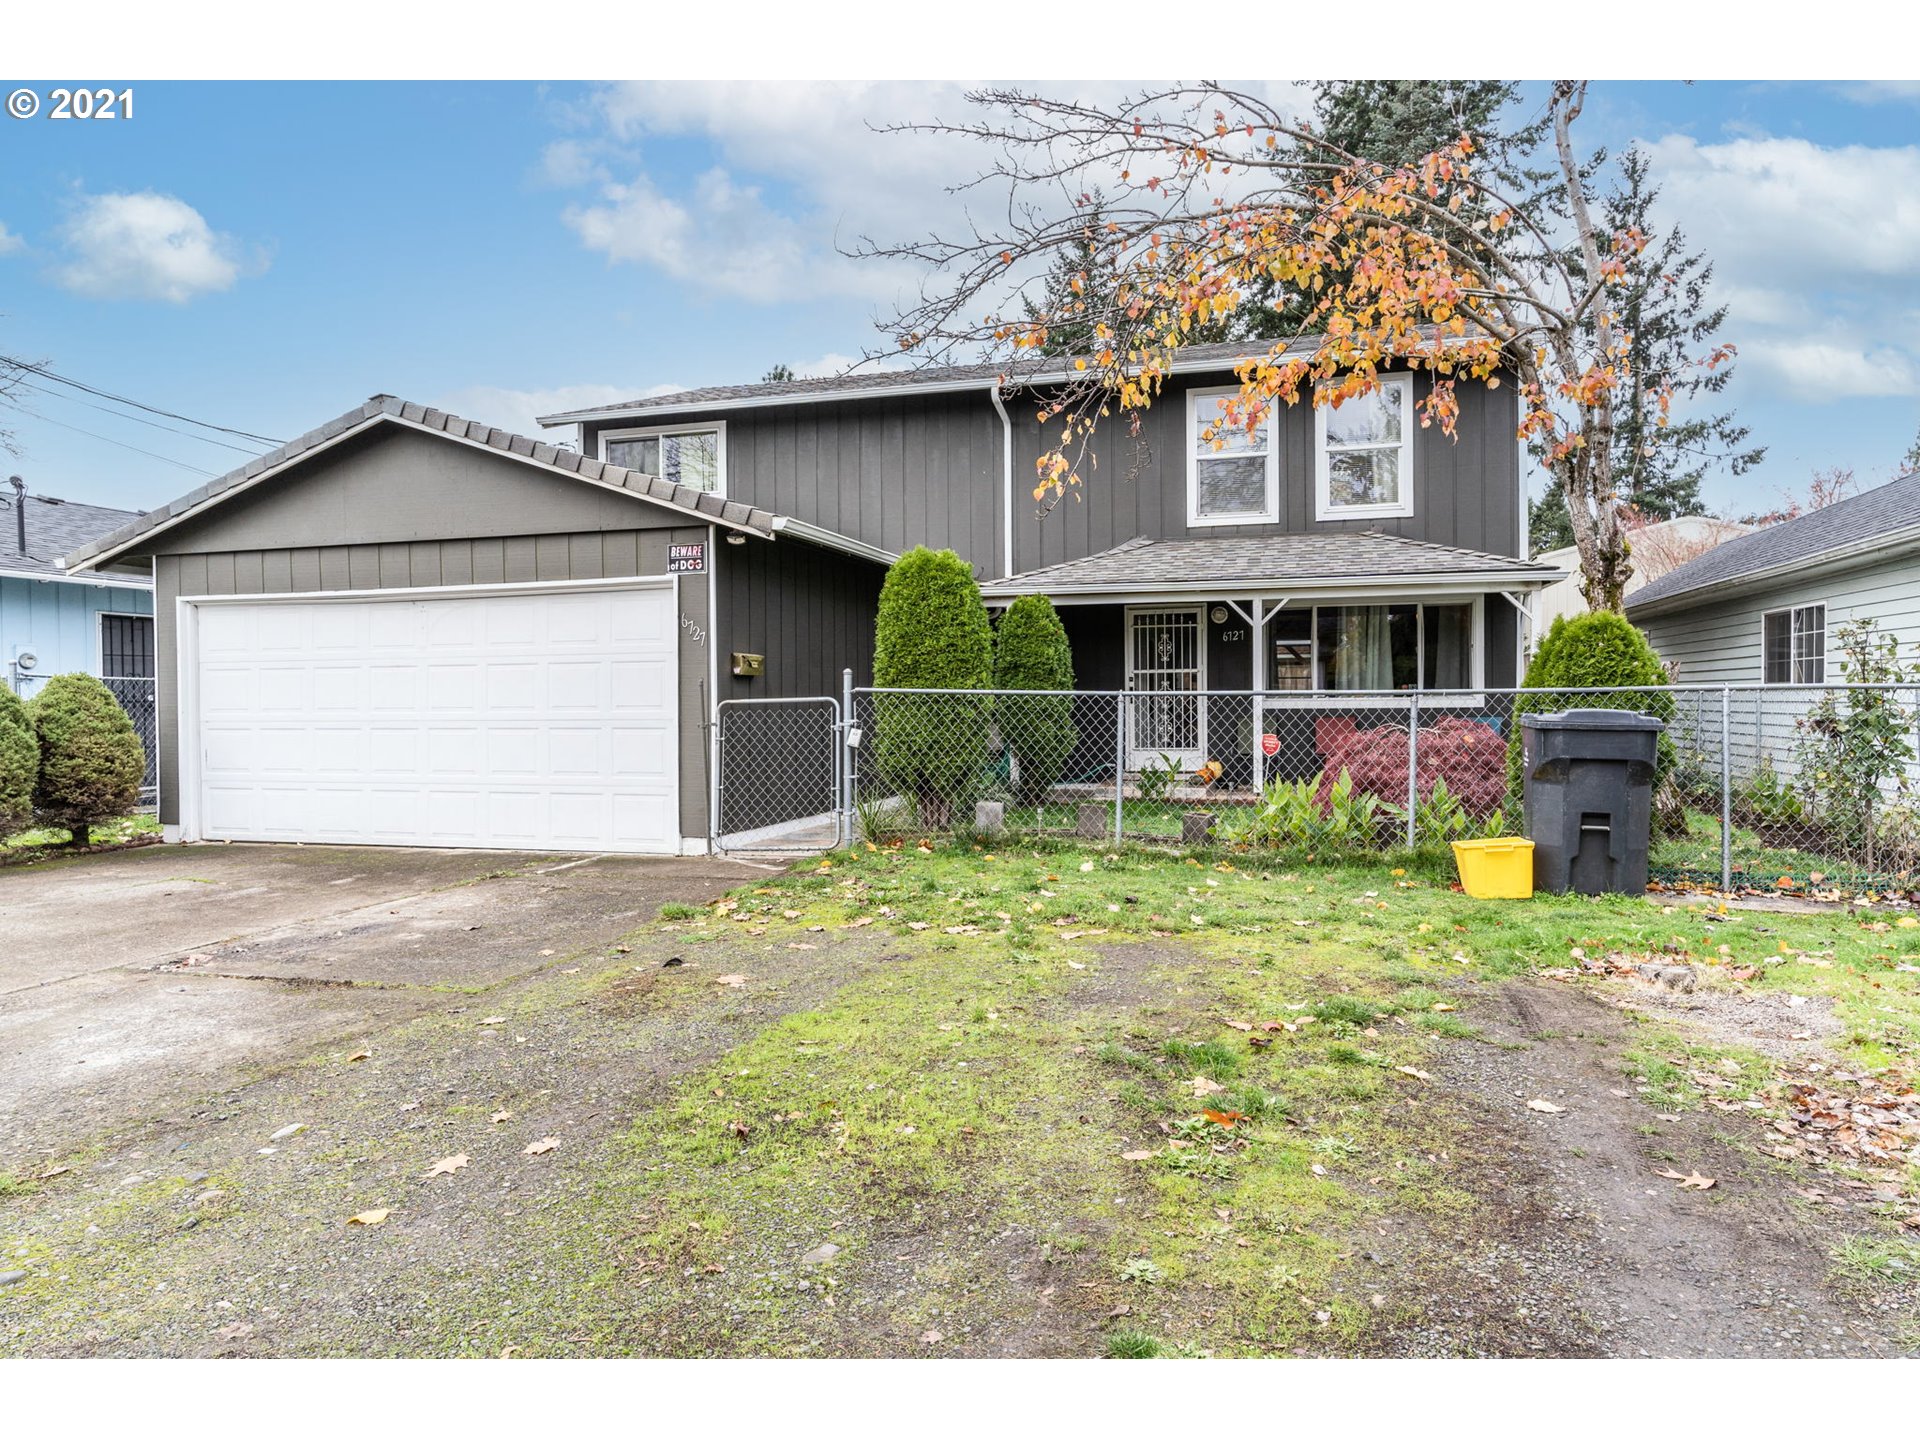 6727 SE 65TH AVE (1 of 29)